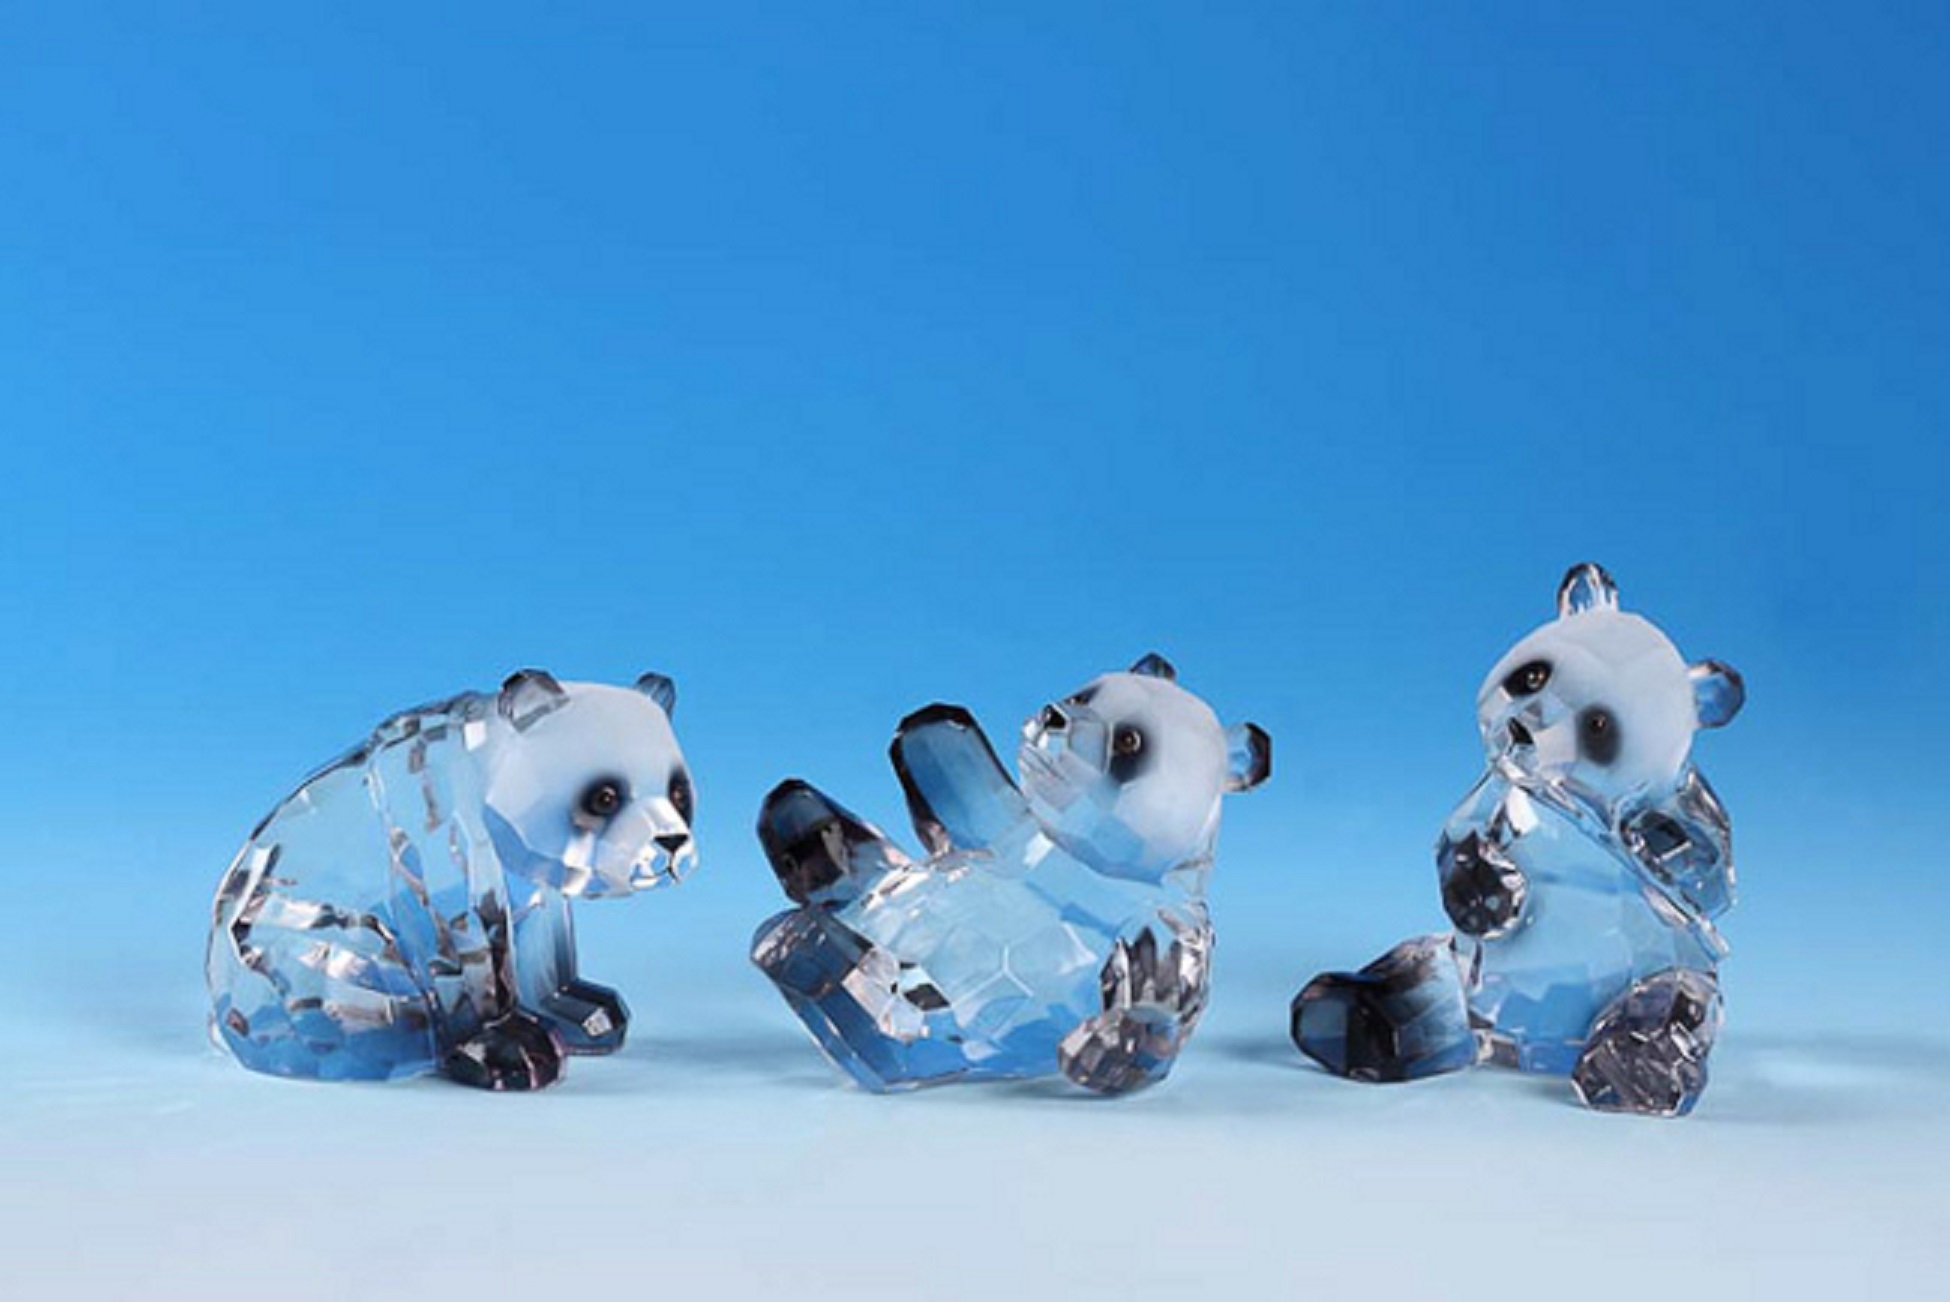 Icy Giftware Club Pack of 12 Clear Icy Crystal Decorative Panda Bear Figurines 3.5"